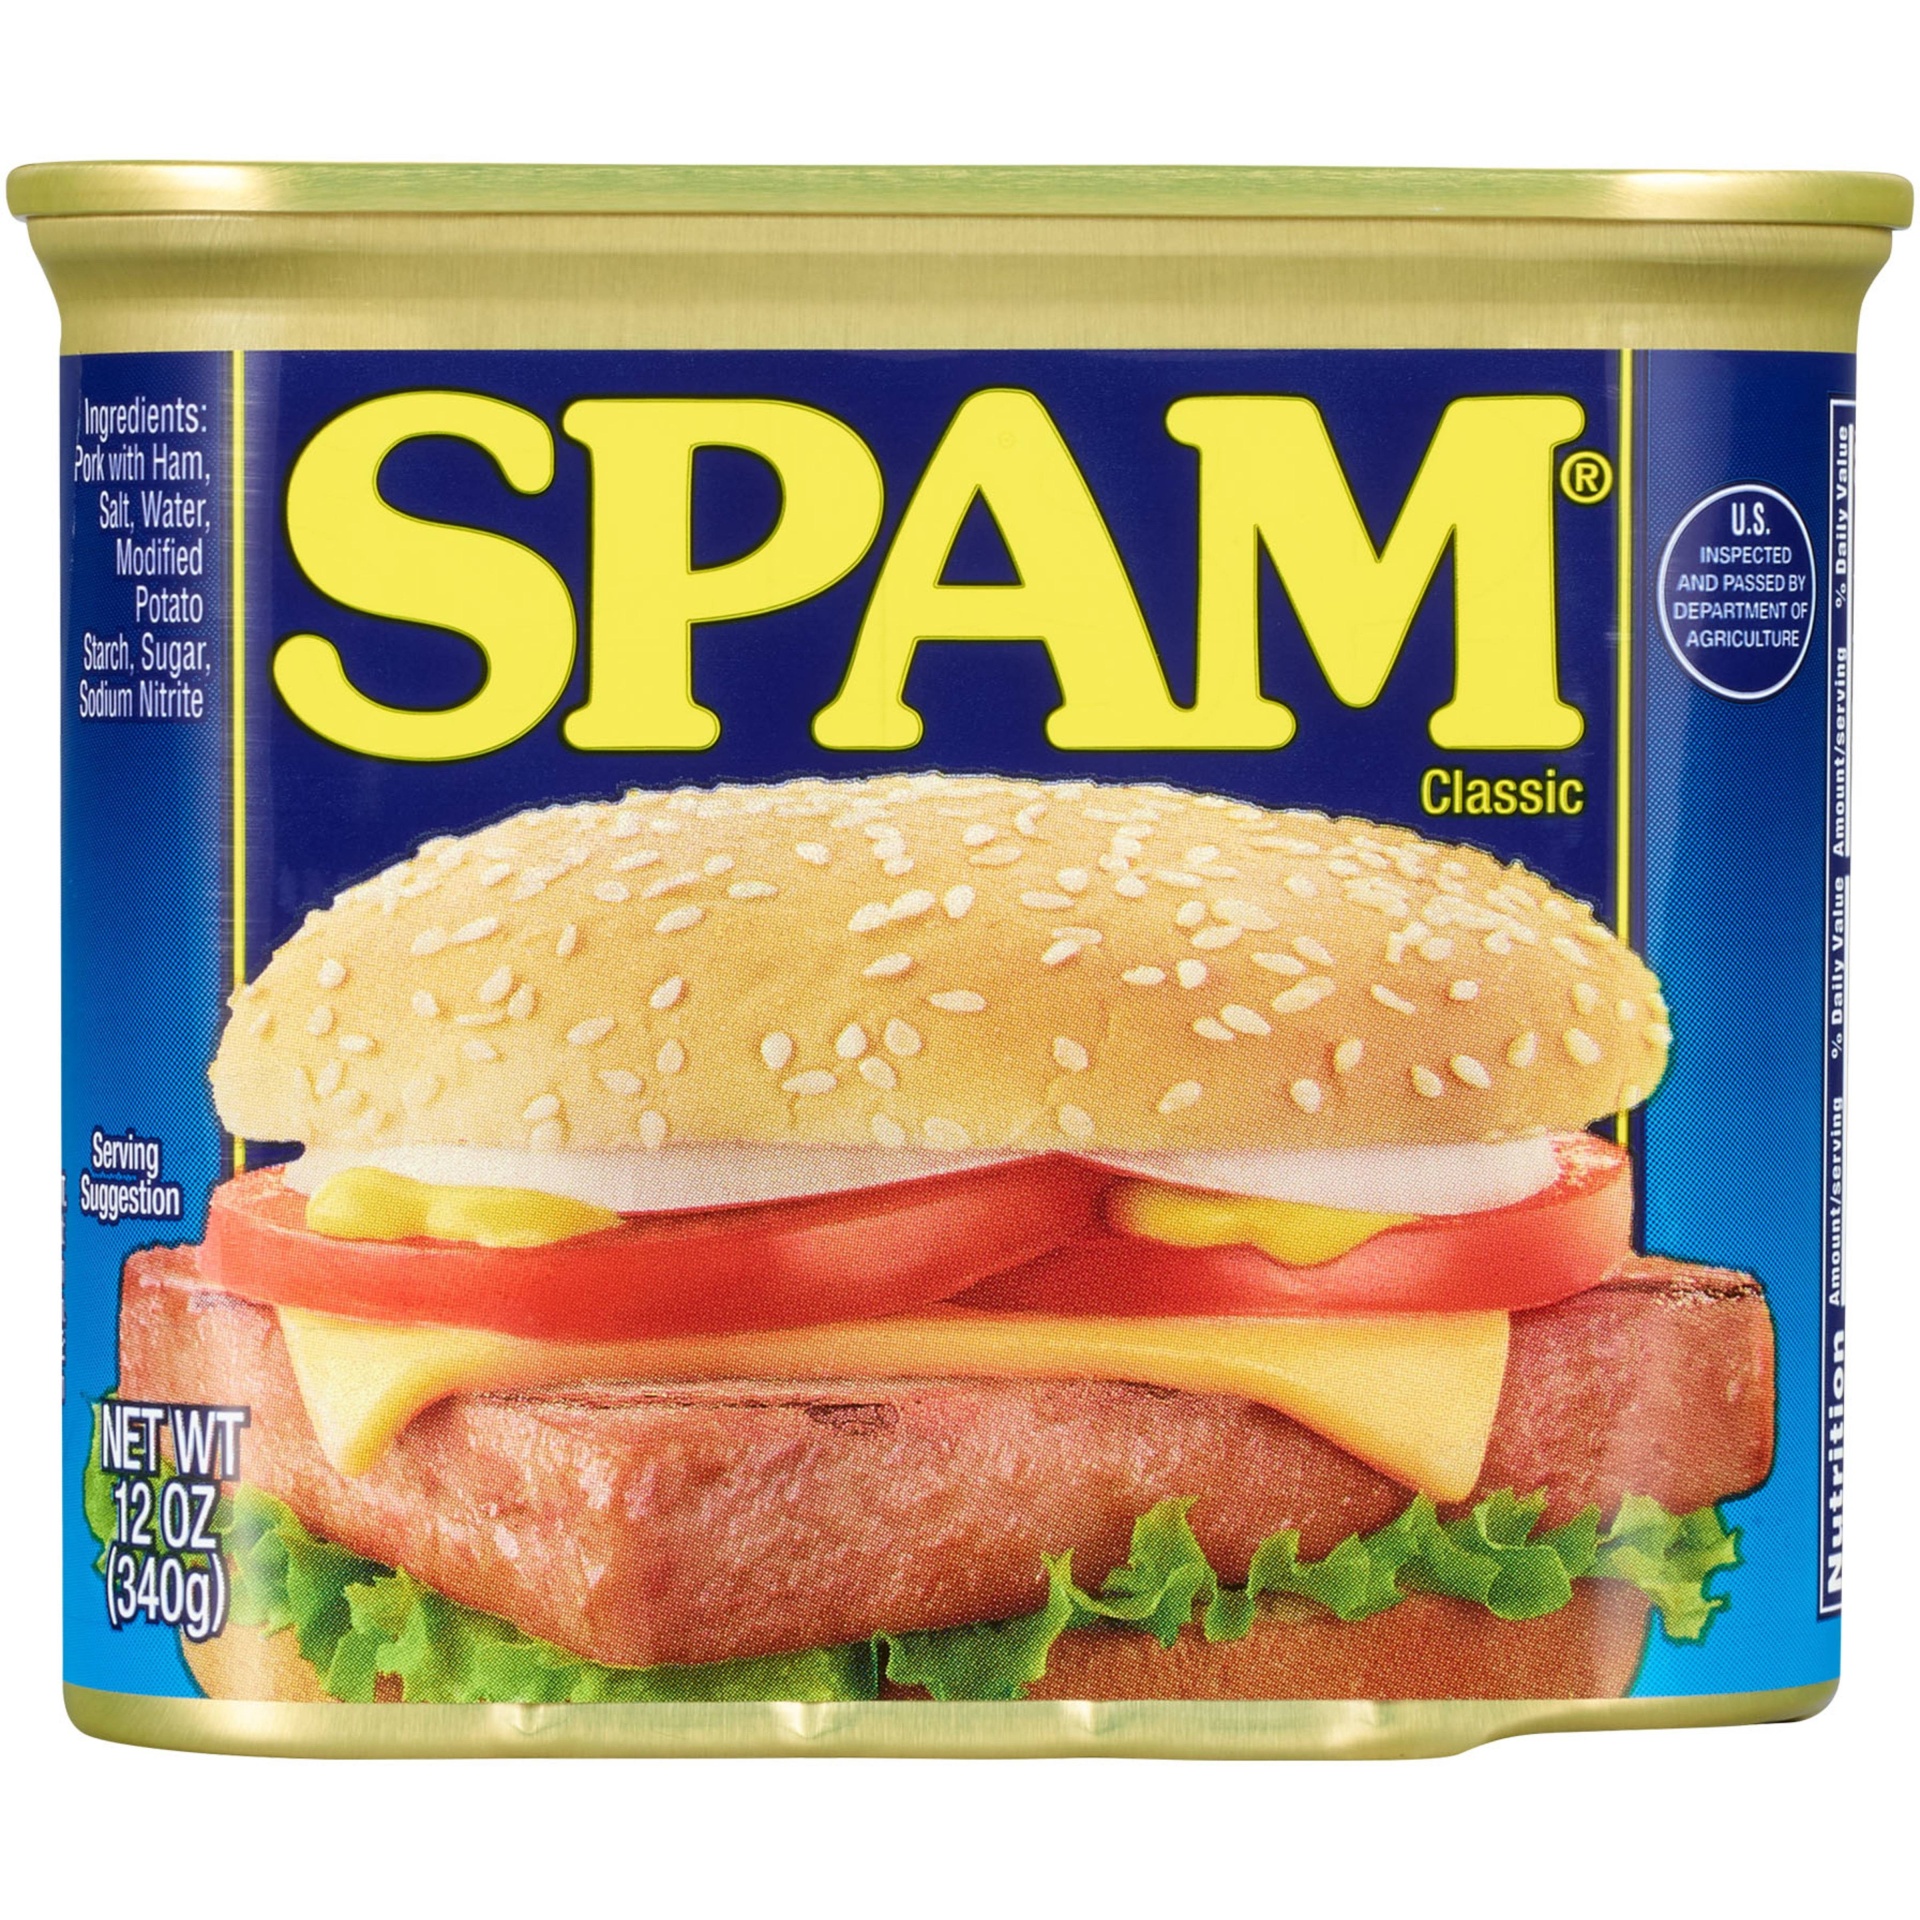 slide 1 of 8, SPAM Classic Meat Product, 12 oz